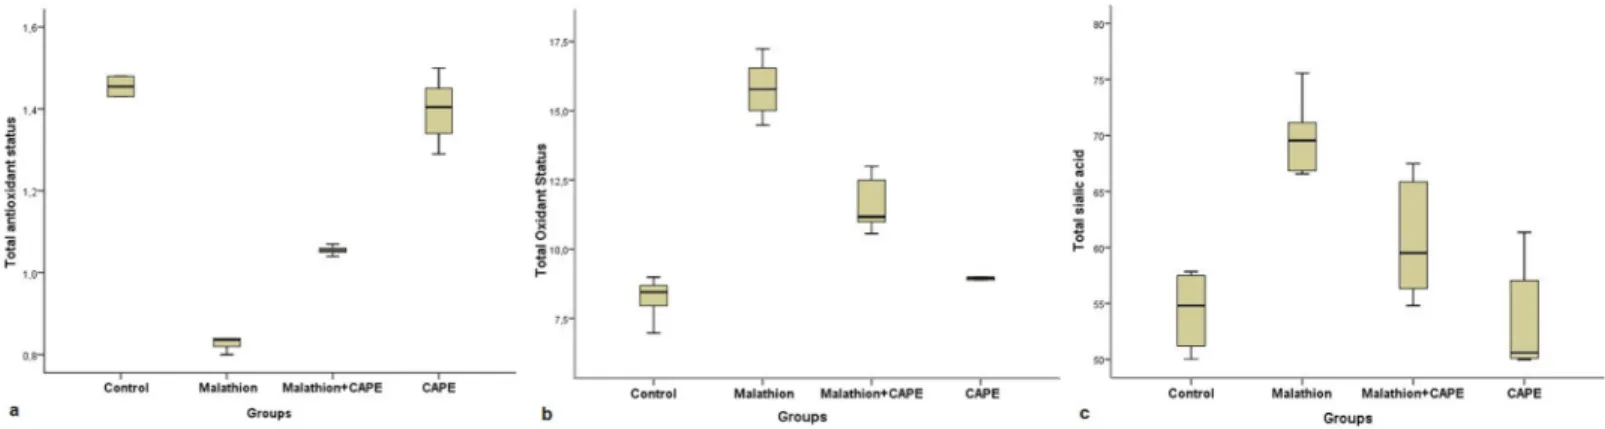 Figure 2. Box plot display of CAPE on TAS, TOS and TSA values in rats treated with subacute malathion 